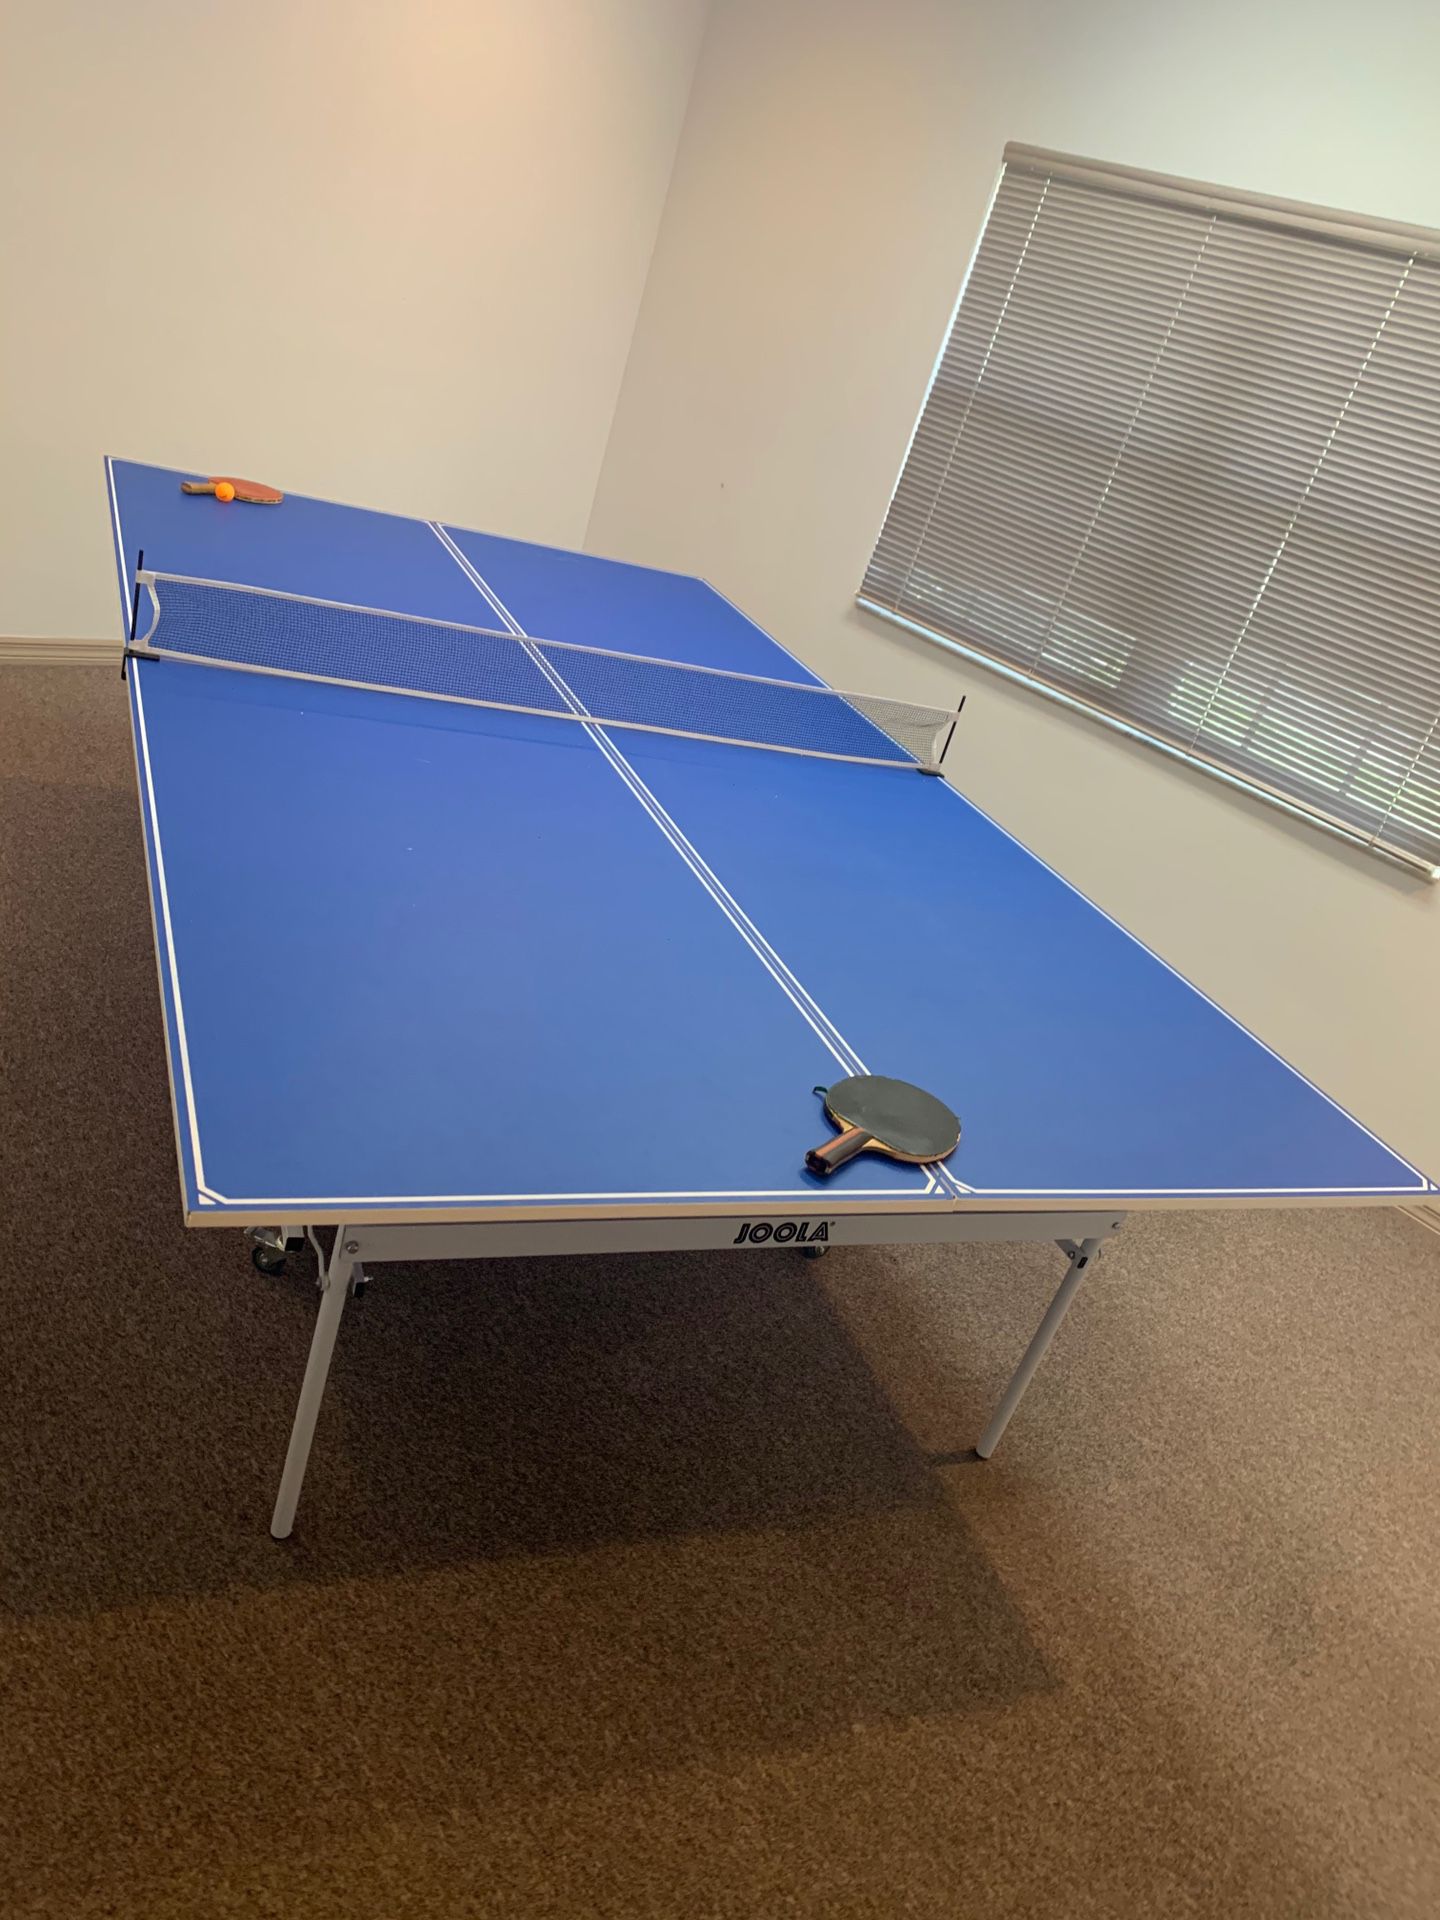 Brand new ping pong table